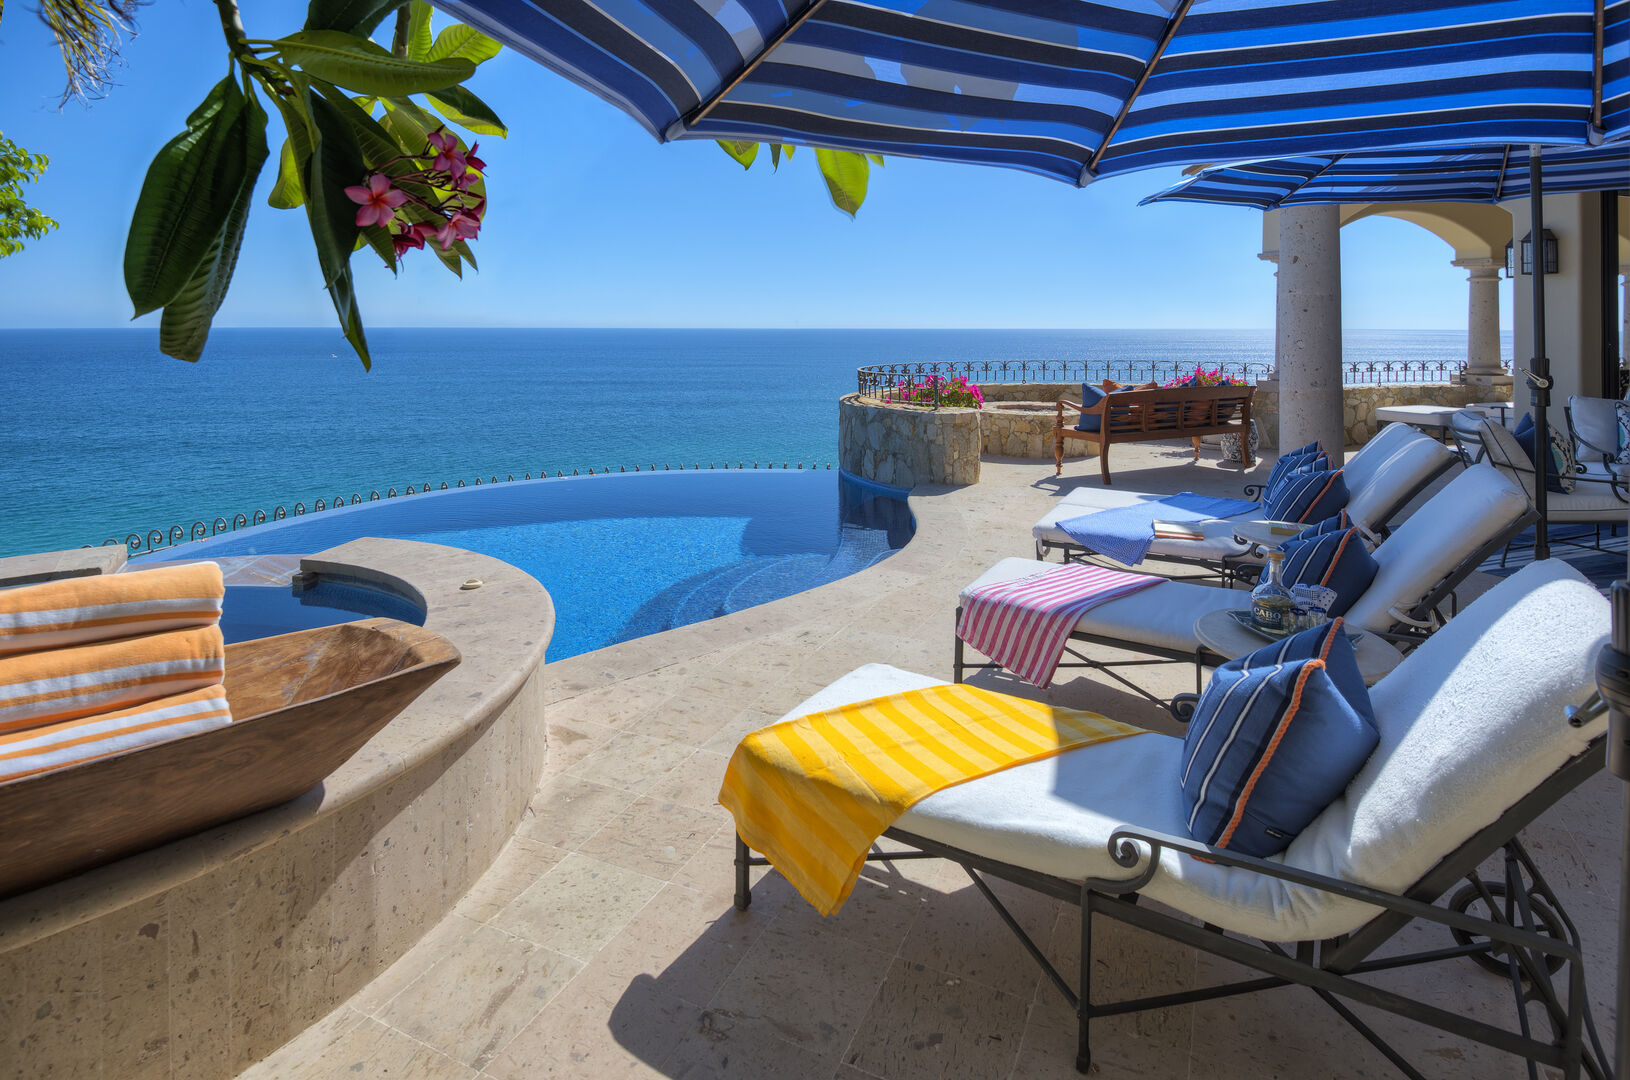 This villa in Los Cabos features a pool that overlooks the ocean!